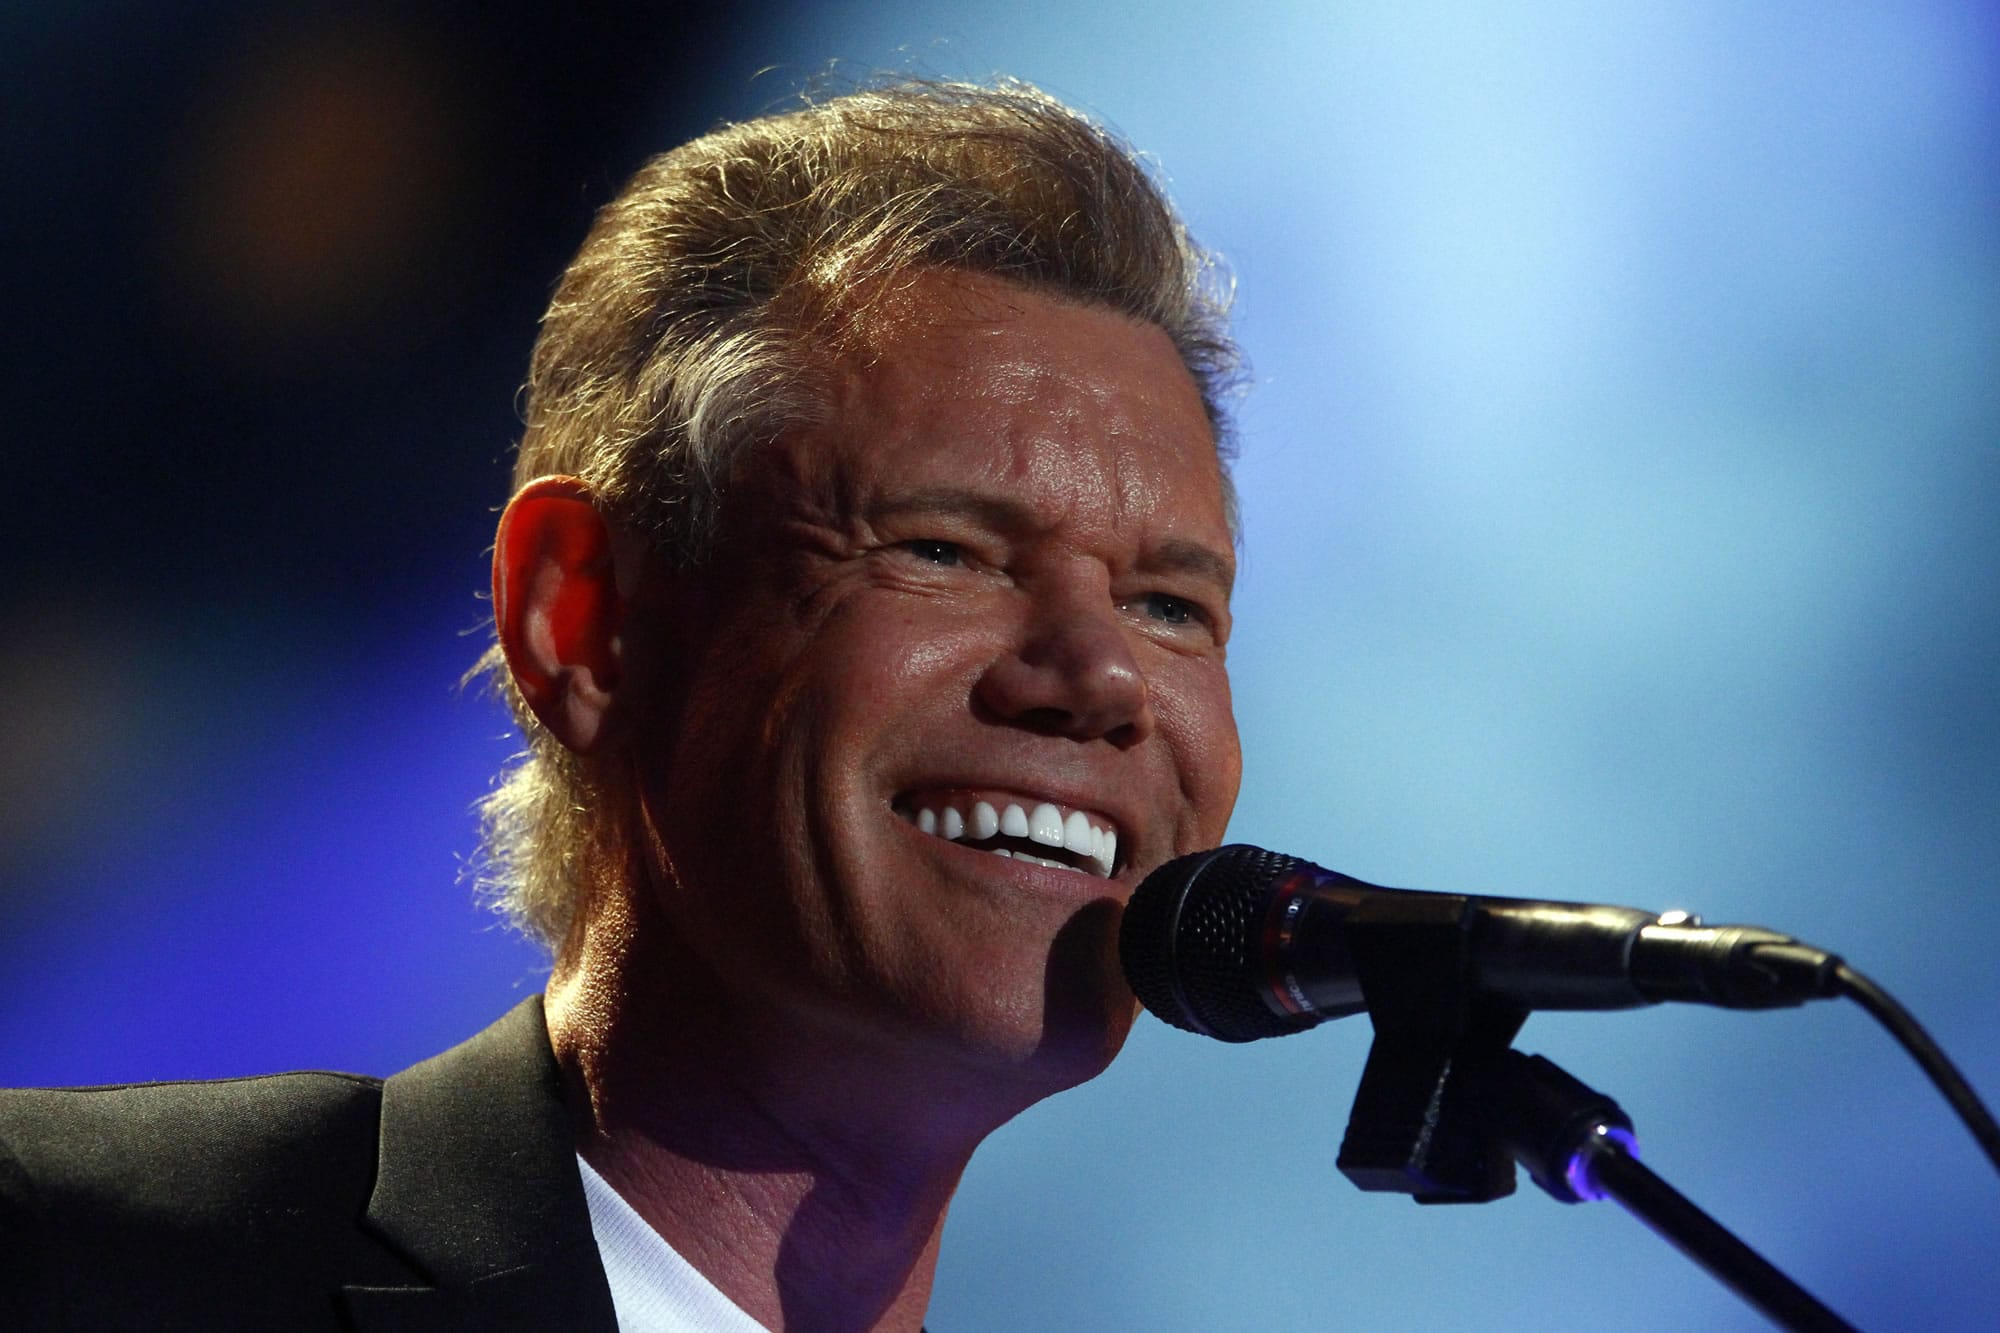 Randy Travis performs June 7 in the 2013 CMA Music festival at the LP Field in Nashville, Tenn. Publicist Kirt Webster on Wednesday night, July 10, 2013 said that the 54-year-old Travis is in surgery after suffering a stroke while he was being treated for congestive heart failure because of a viral illness.